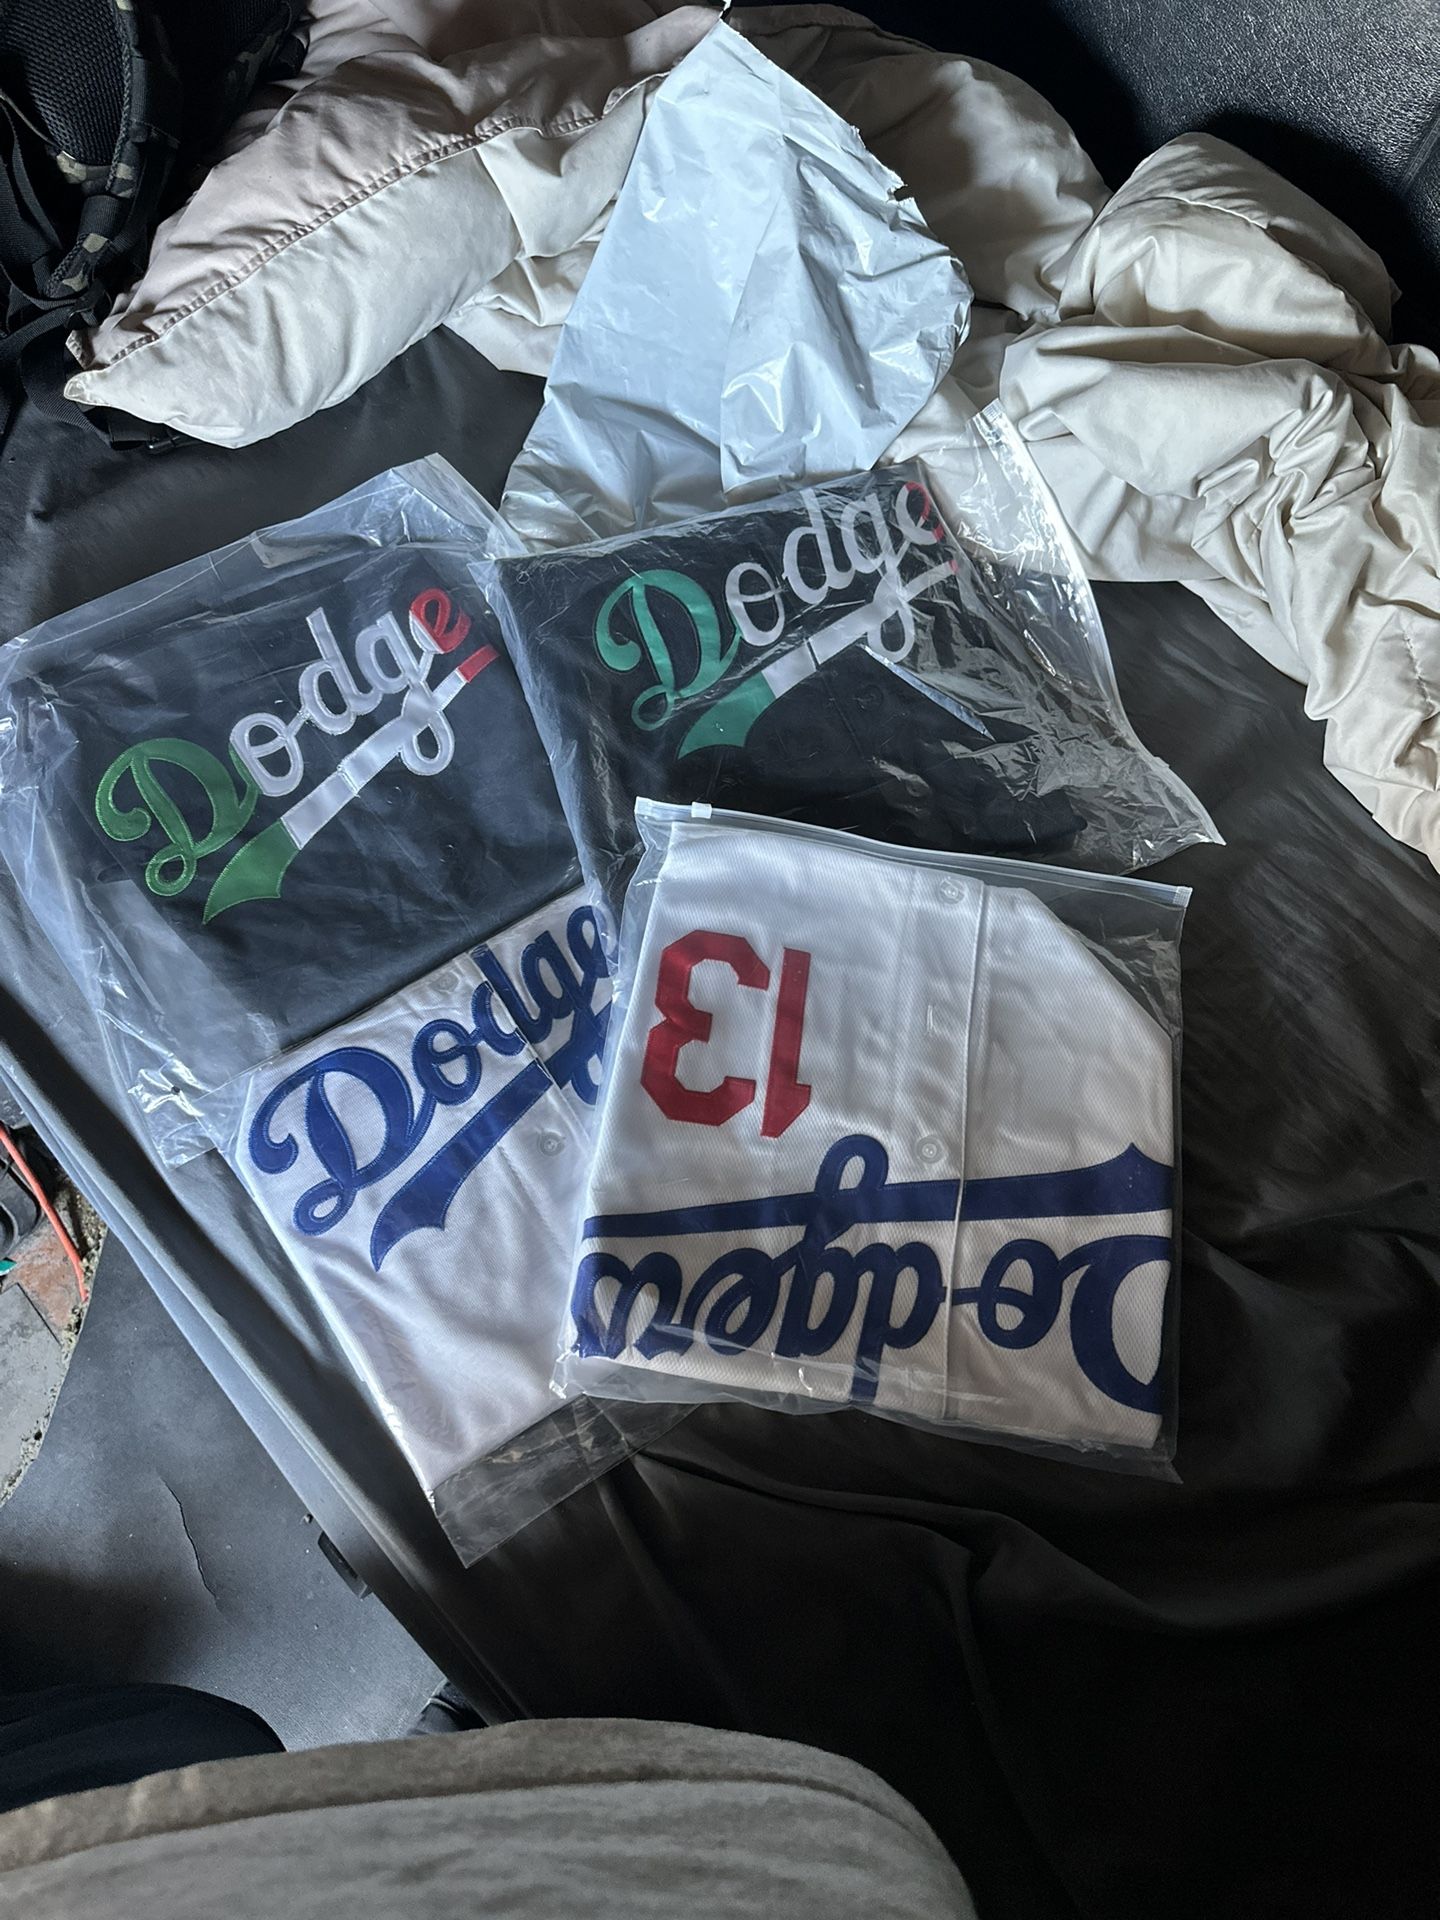 Dodgers Women Jersey for Sale in Highland Park, CA - OfferUp